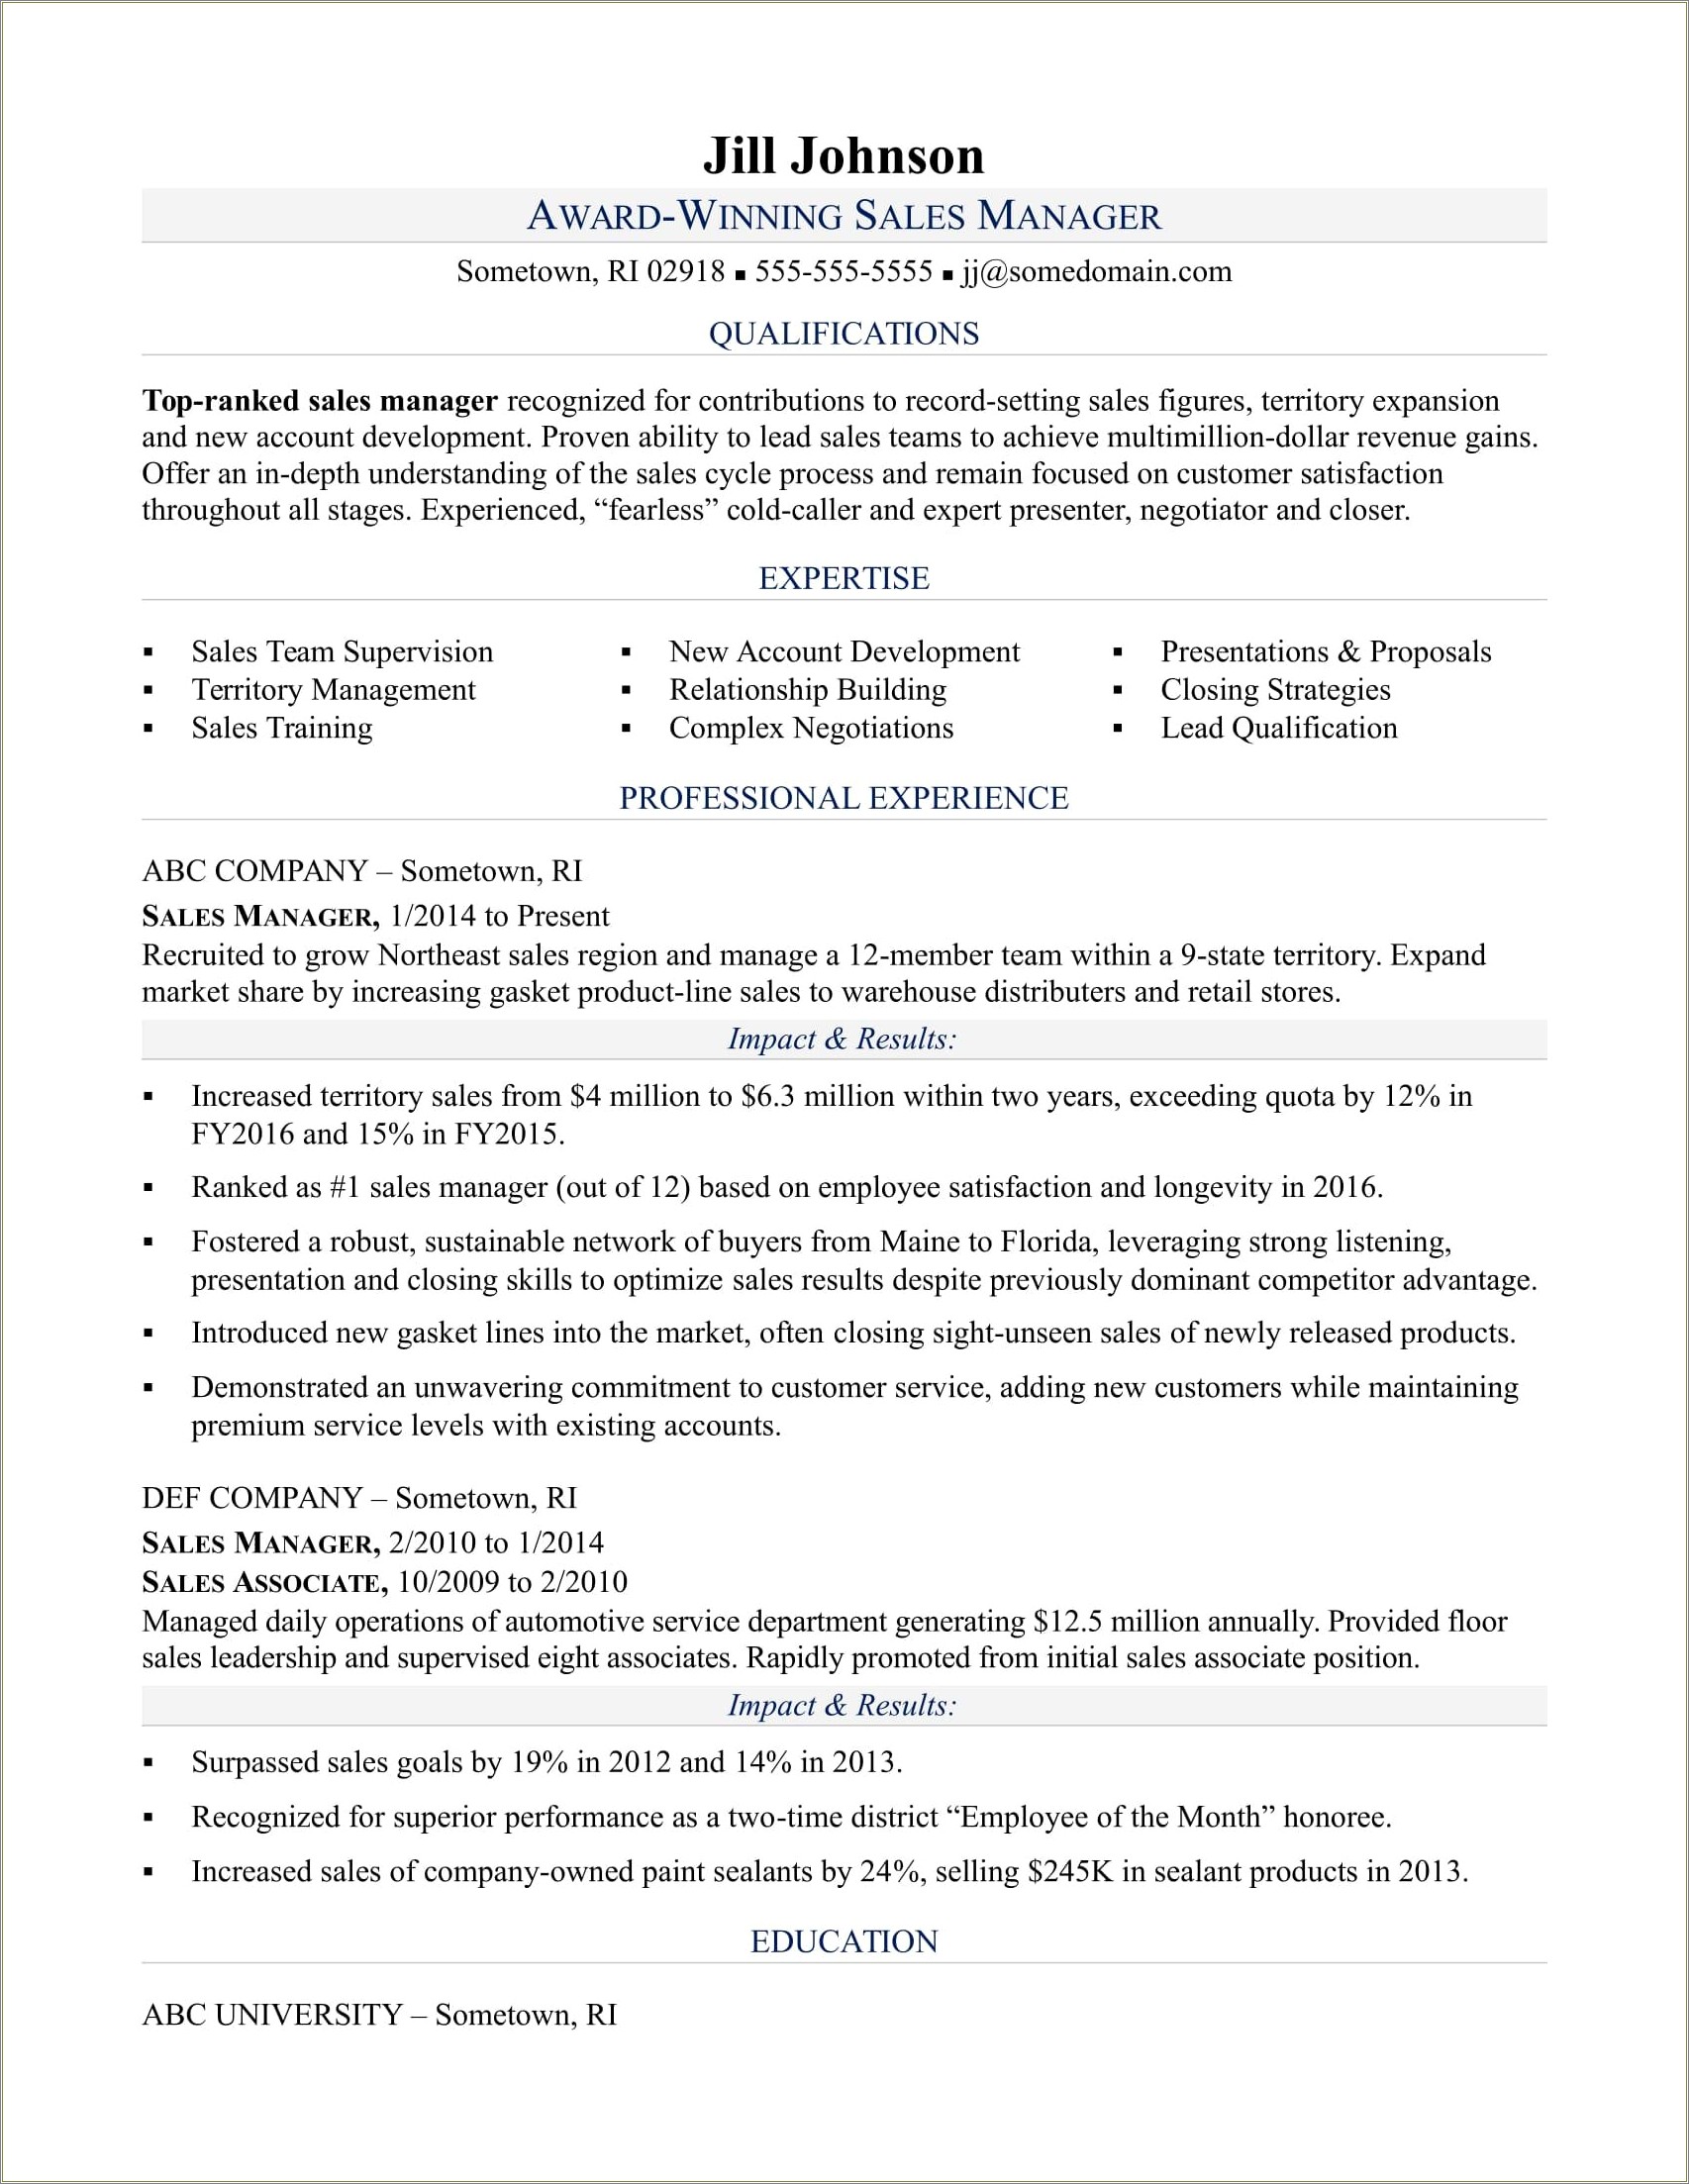 Administrative Jobs Ticket Buying Reselling Description Resume